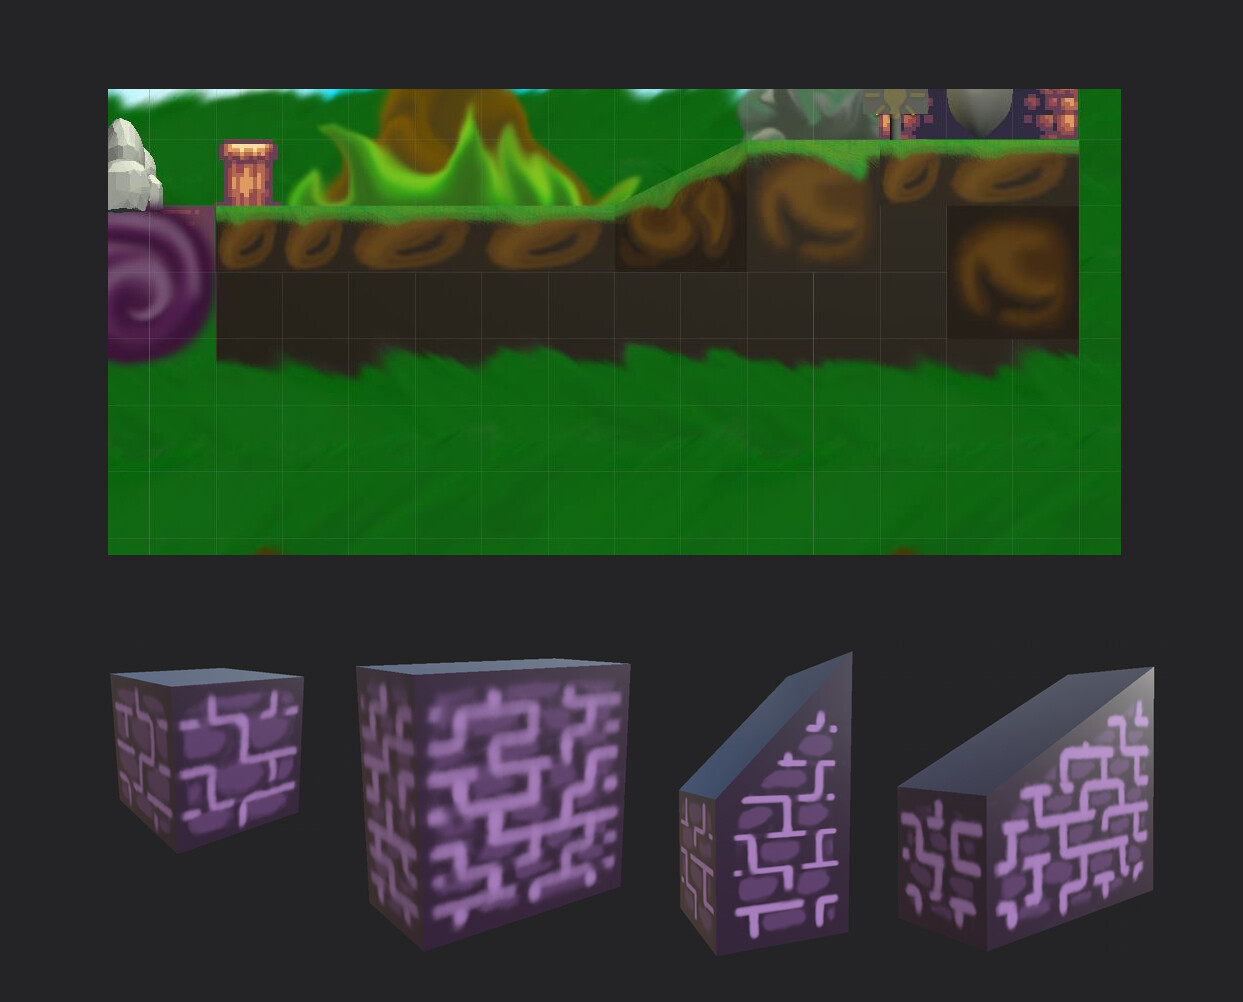 Ground Geometry, modeled by Memphis and textured by myself. The pieces were designed to tile freely among themselves.